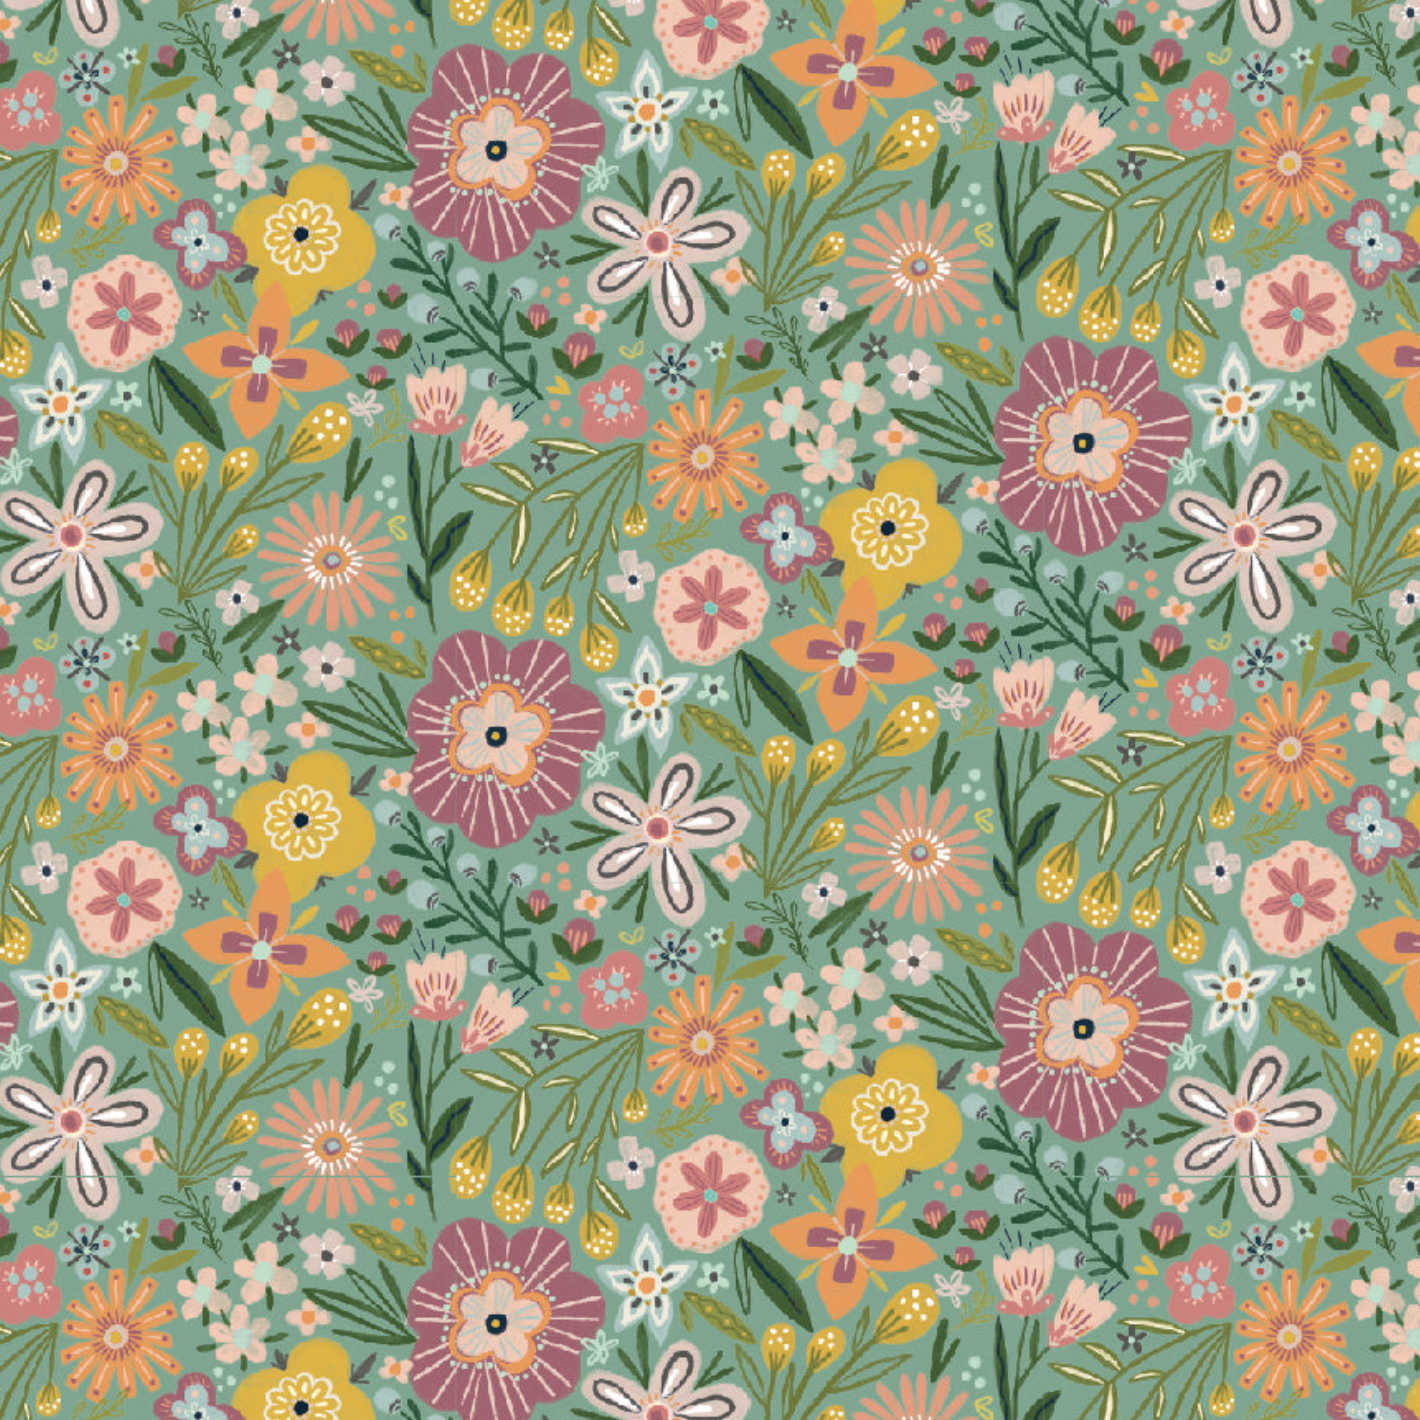 Cottage Charm, Bursting Blossom Teal CH24750, sold by the 1/2 yard, *PREORDER